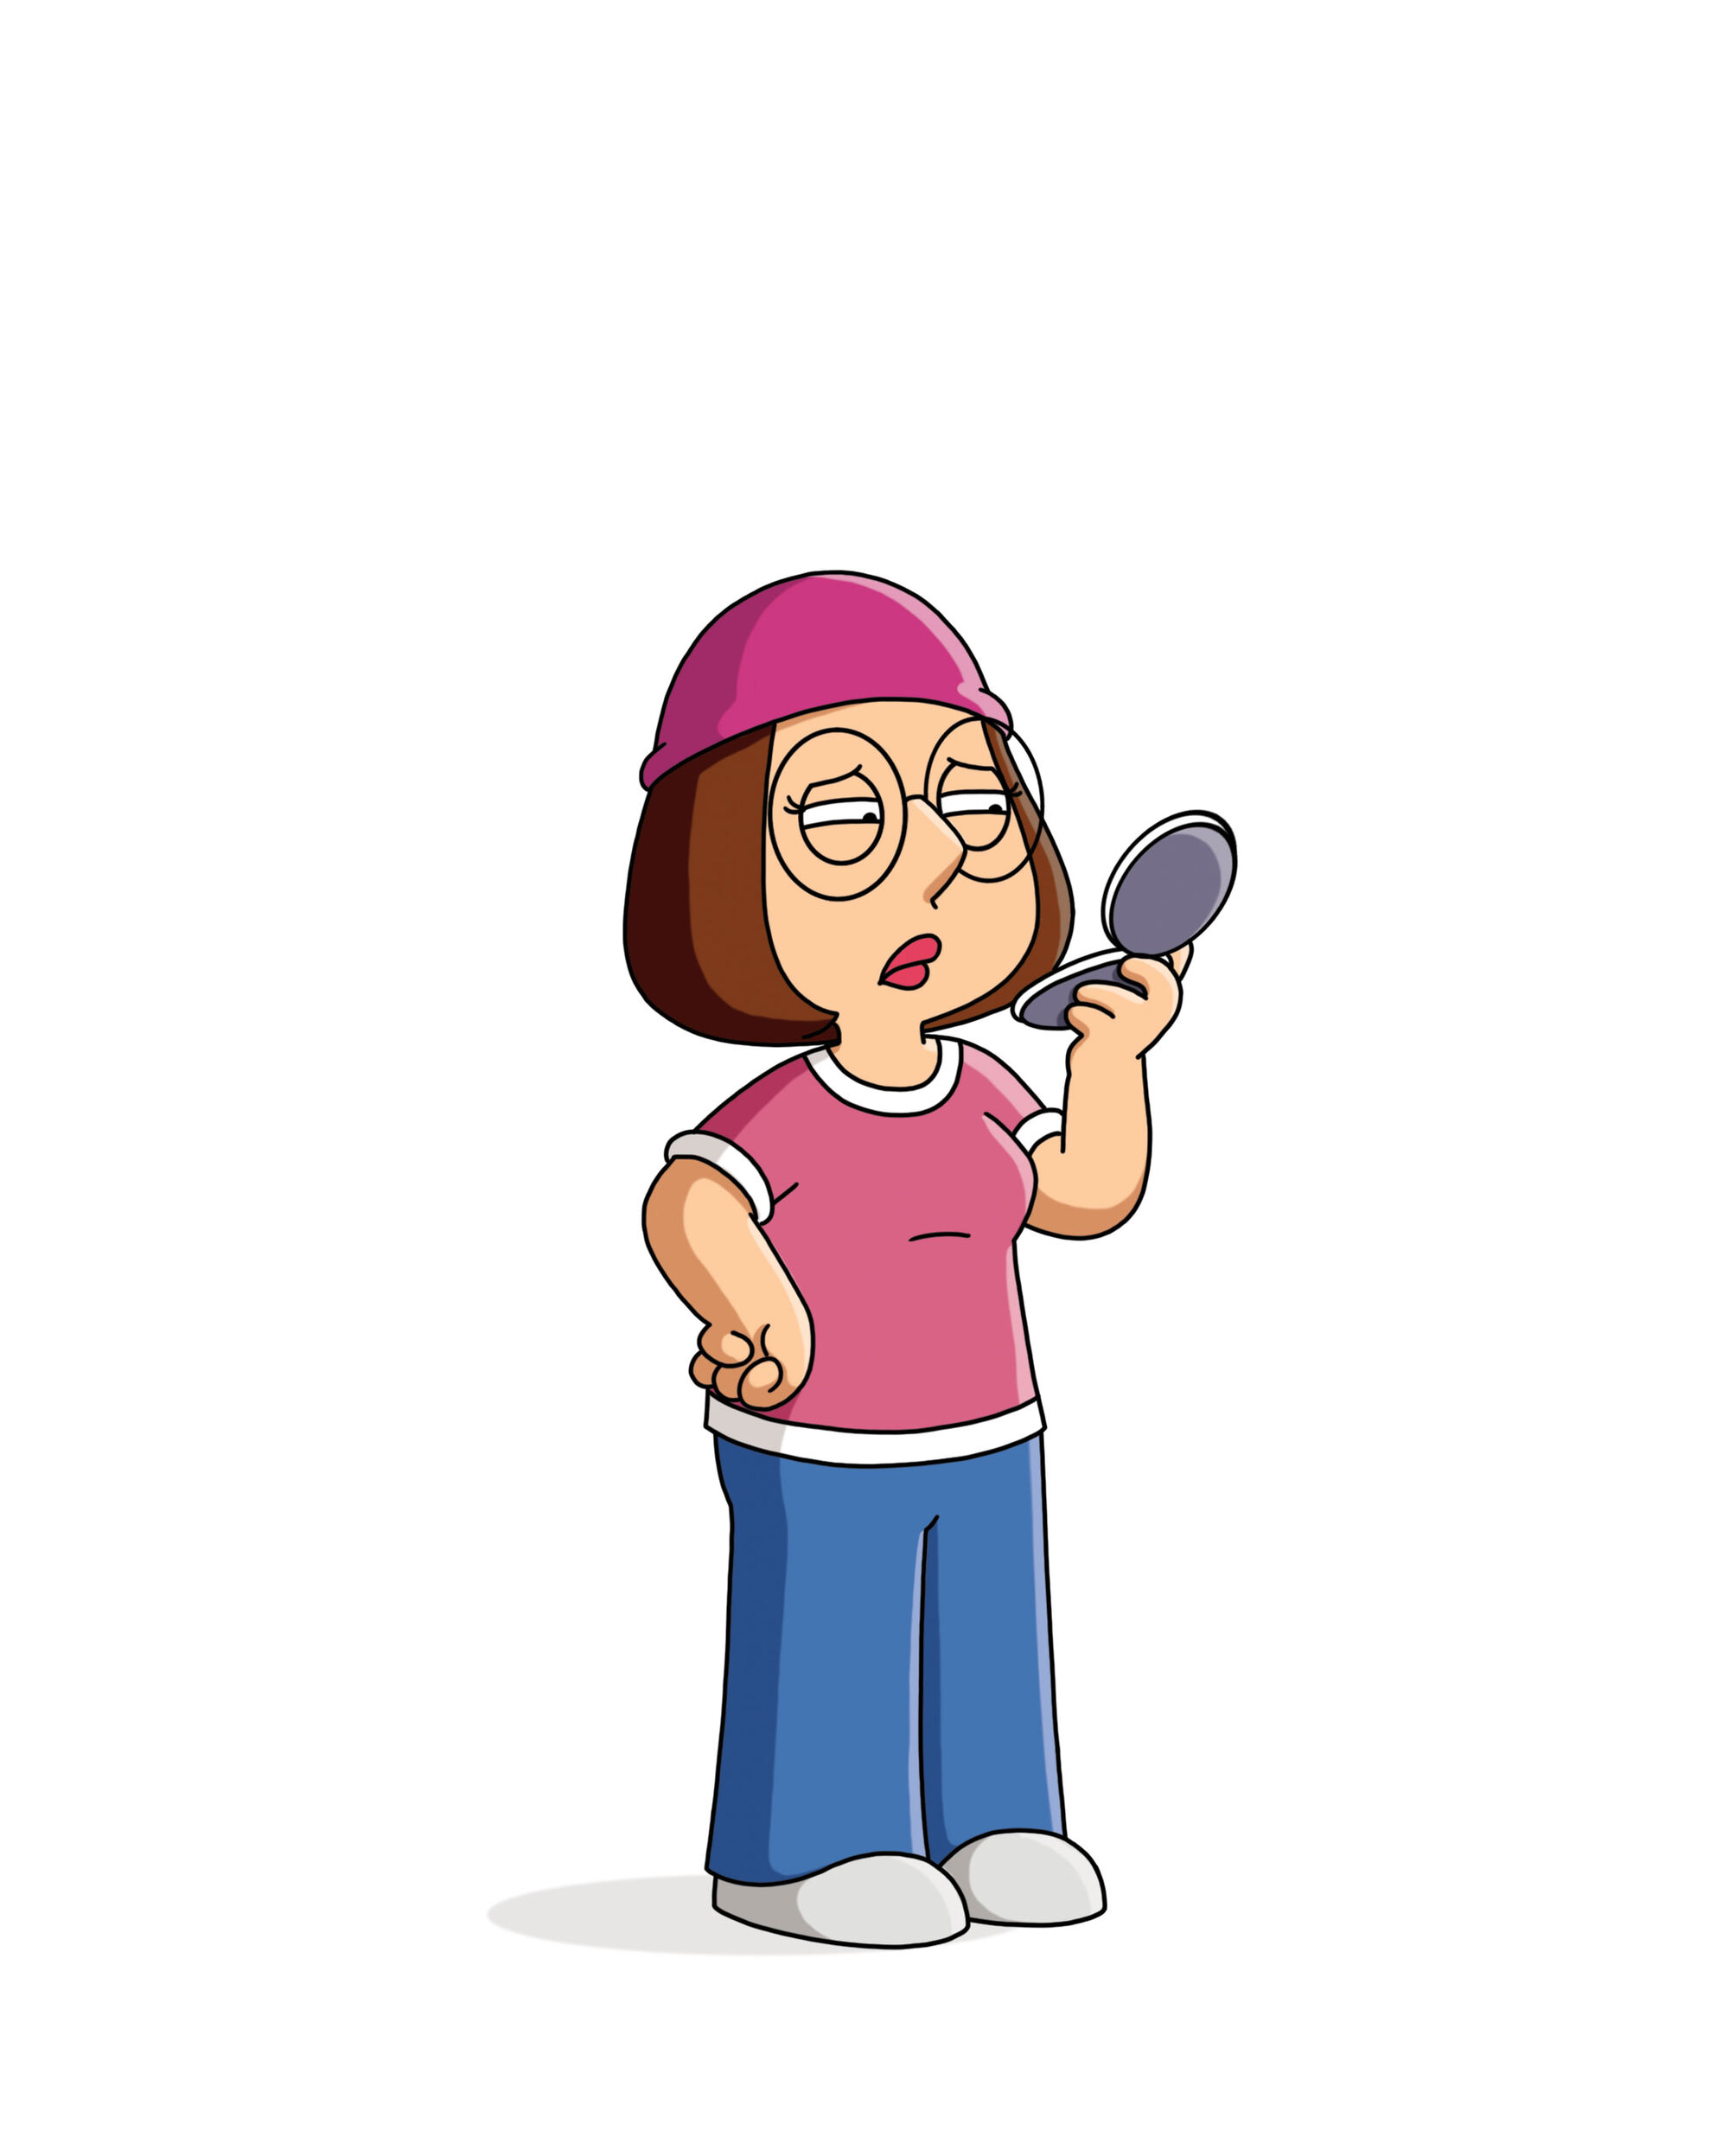 Everything you need to know about Meg Griffin from Family Guy.